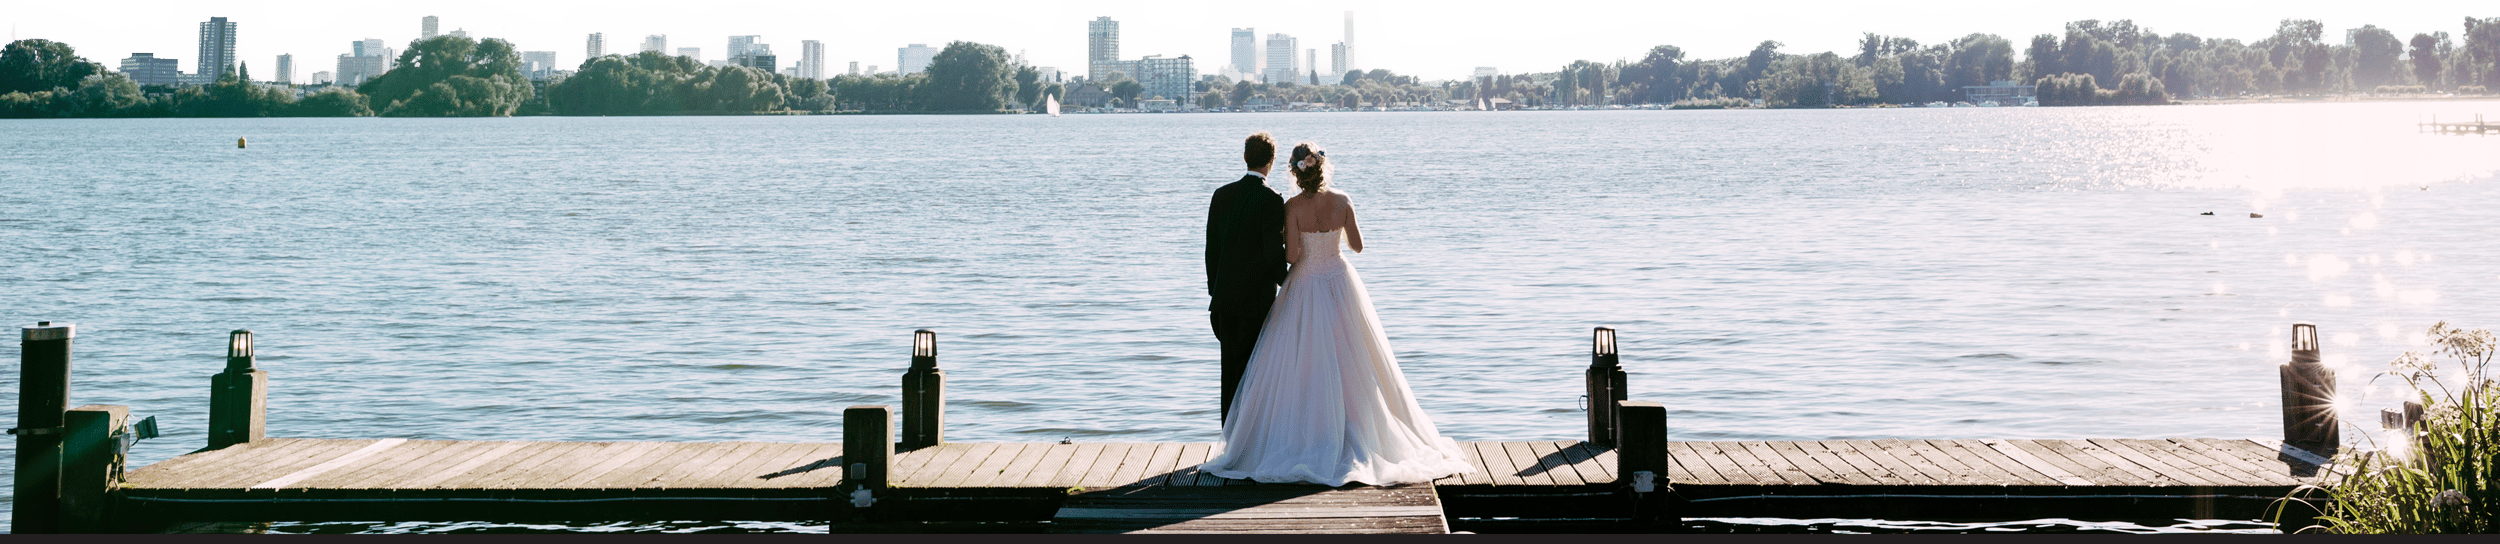 A bride and groom pose for their wedding photographer on a quay next to a picturesque lake.